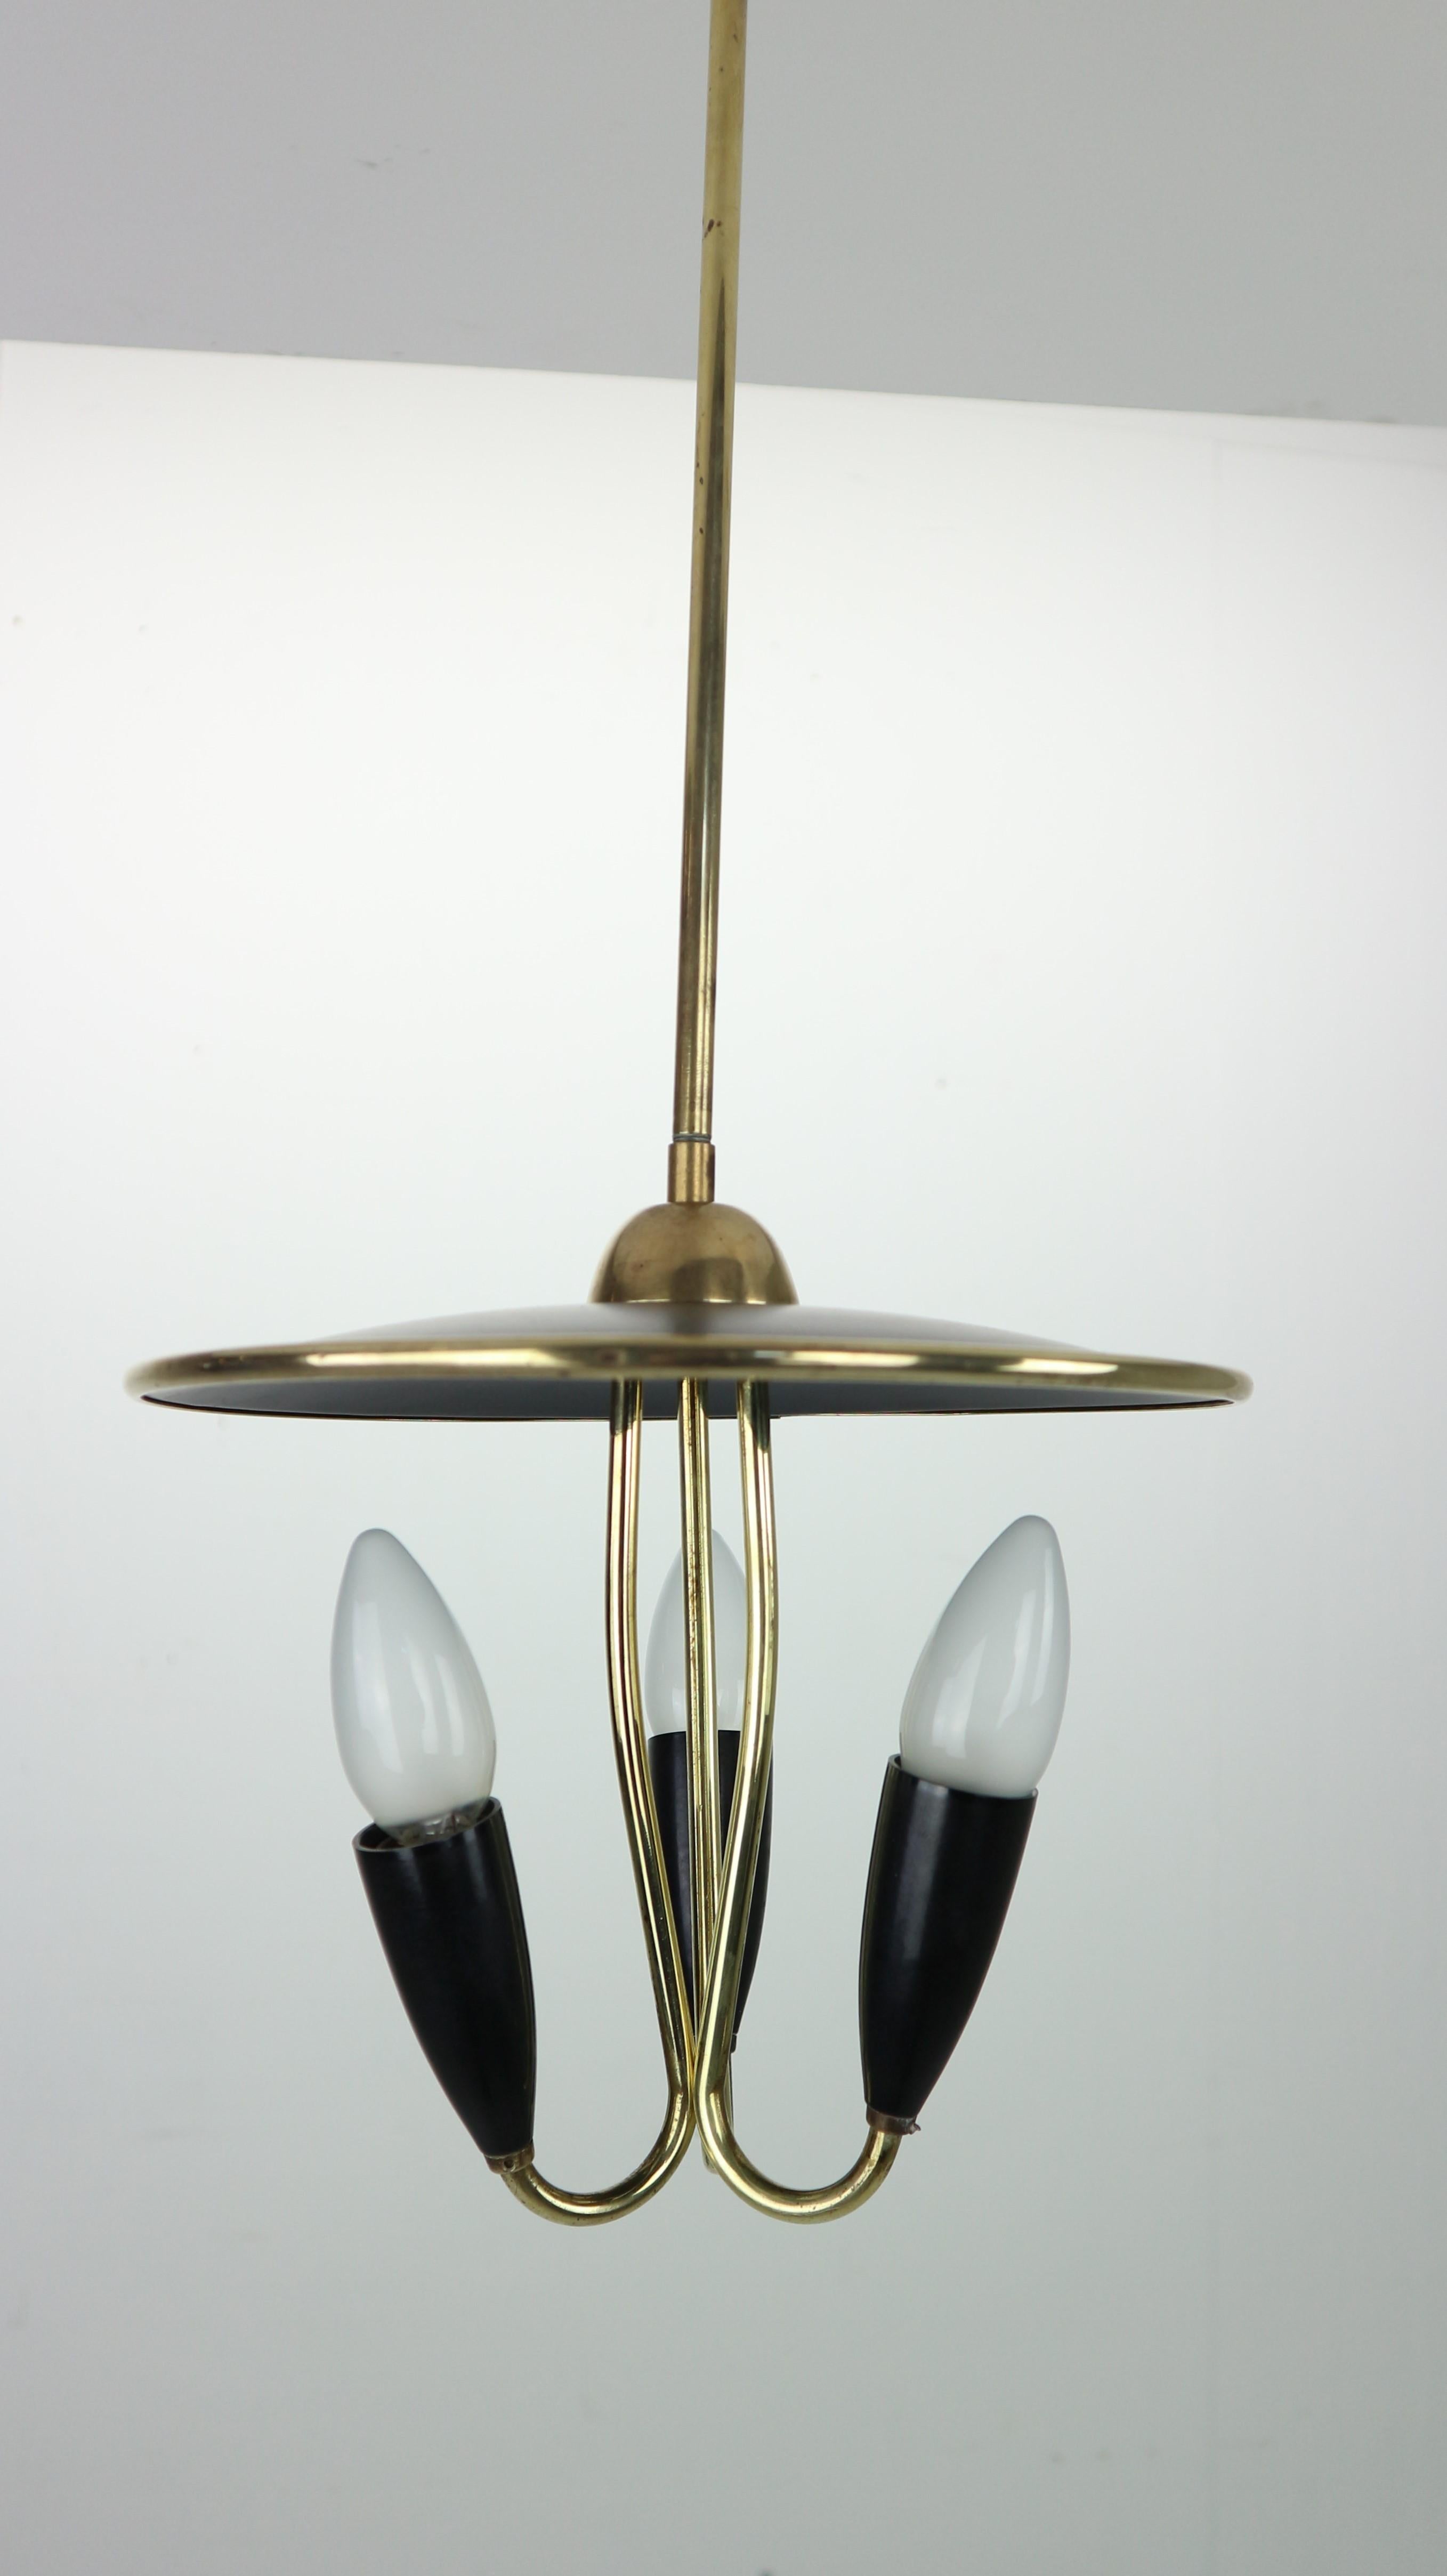 French Mid-Century Modern Brass and Black Metal Chandelier Lamp, 1950s 2